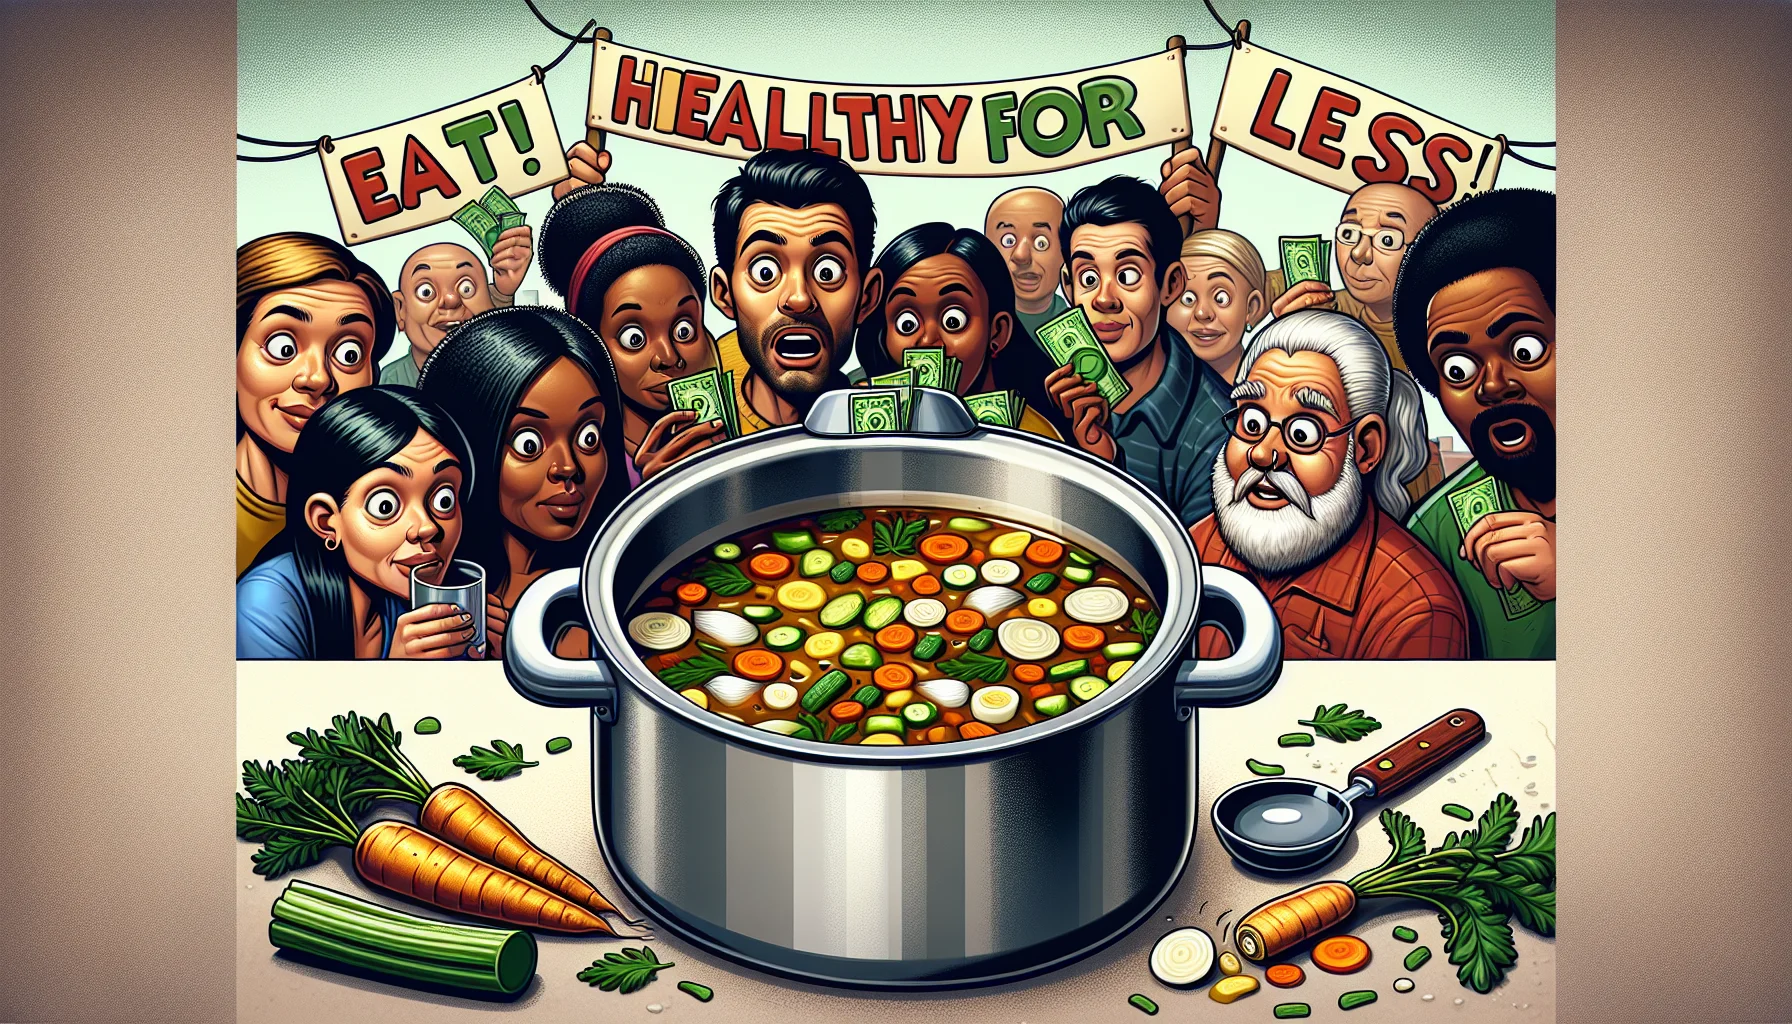 Create a humorous yet realistic image. Picture a large simmering pot of homemade vegetable stock, showcasing an array of colorful vegetables like carrots, onions, and celery, immersed in a rich, golden liquid. In the background, diverse cartoon-style characters with different descents and genders, such as a South Asian woman and a Black man, peer, with eyes widened, over the counter with a surprised and intrigued expression. They hold up less money than usual, suggesting the affordability of the recipe. Overhead, there's a playful banner that says 'Eat Healthy for Less!'